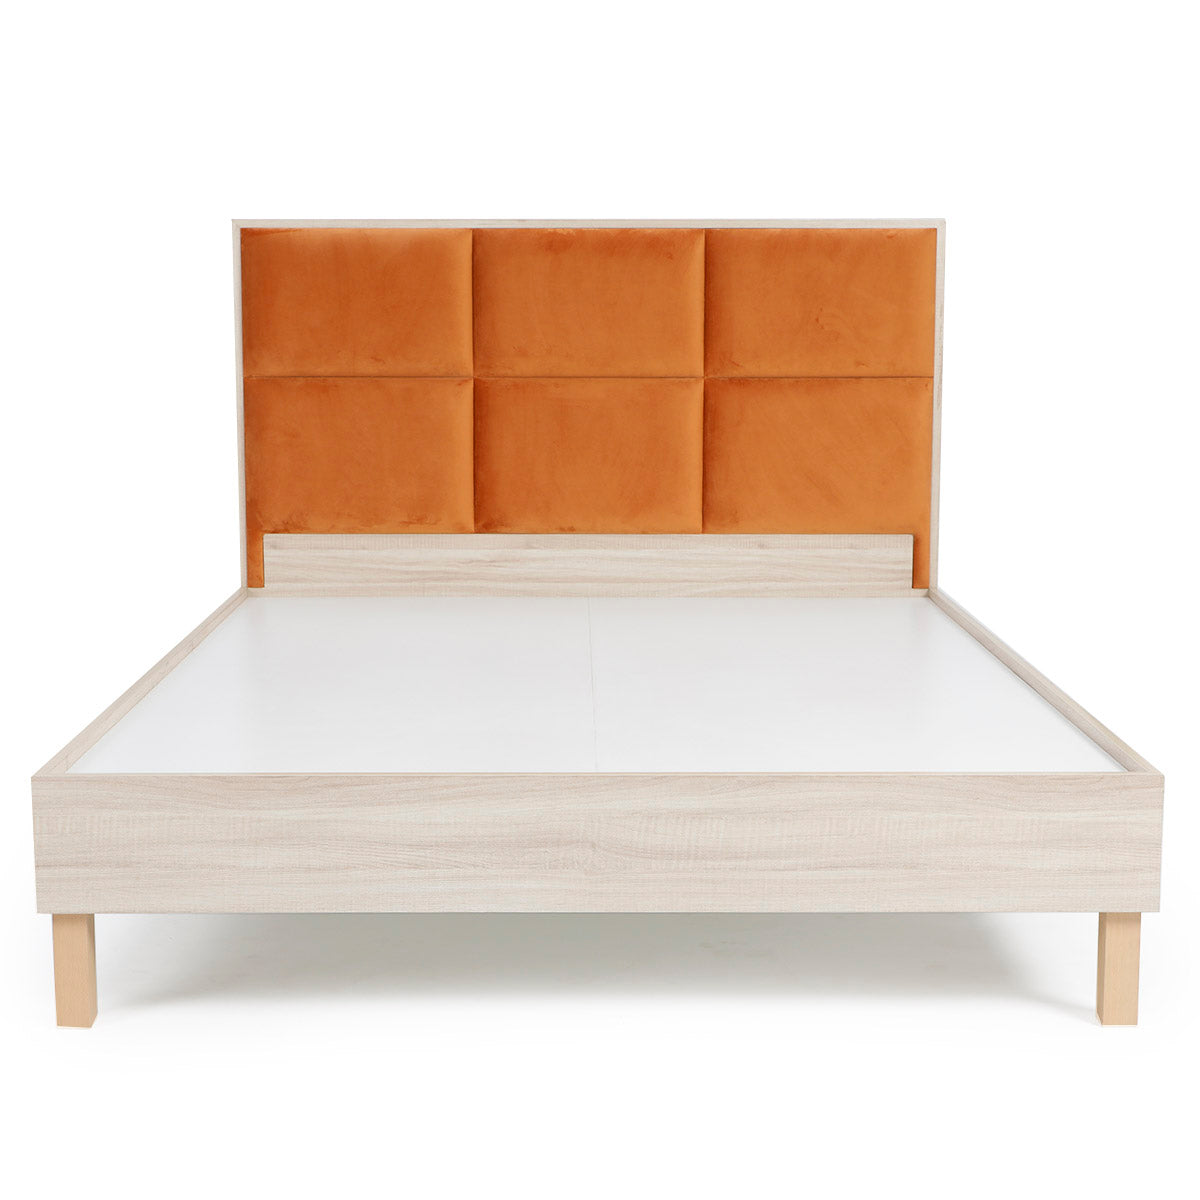 Roma Queen Size Bed